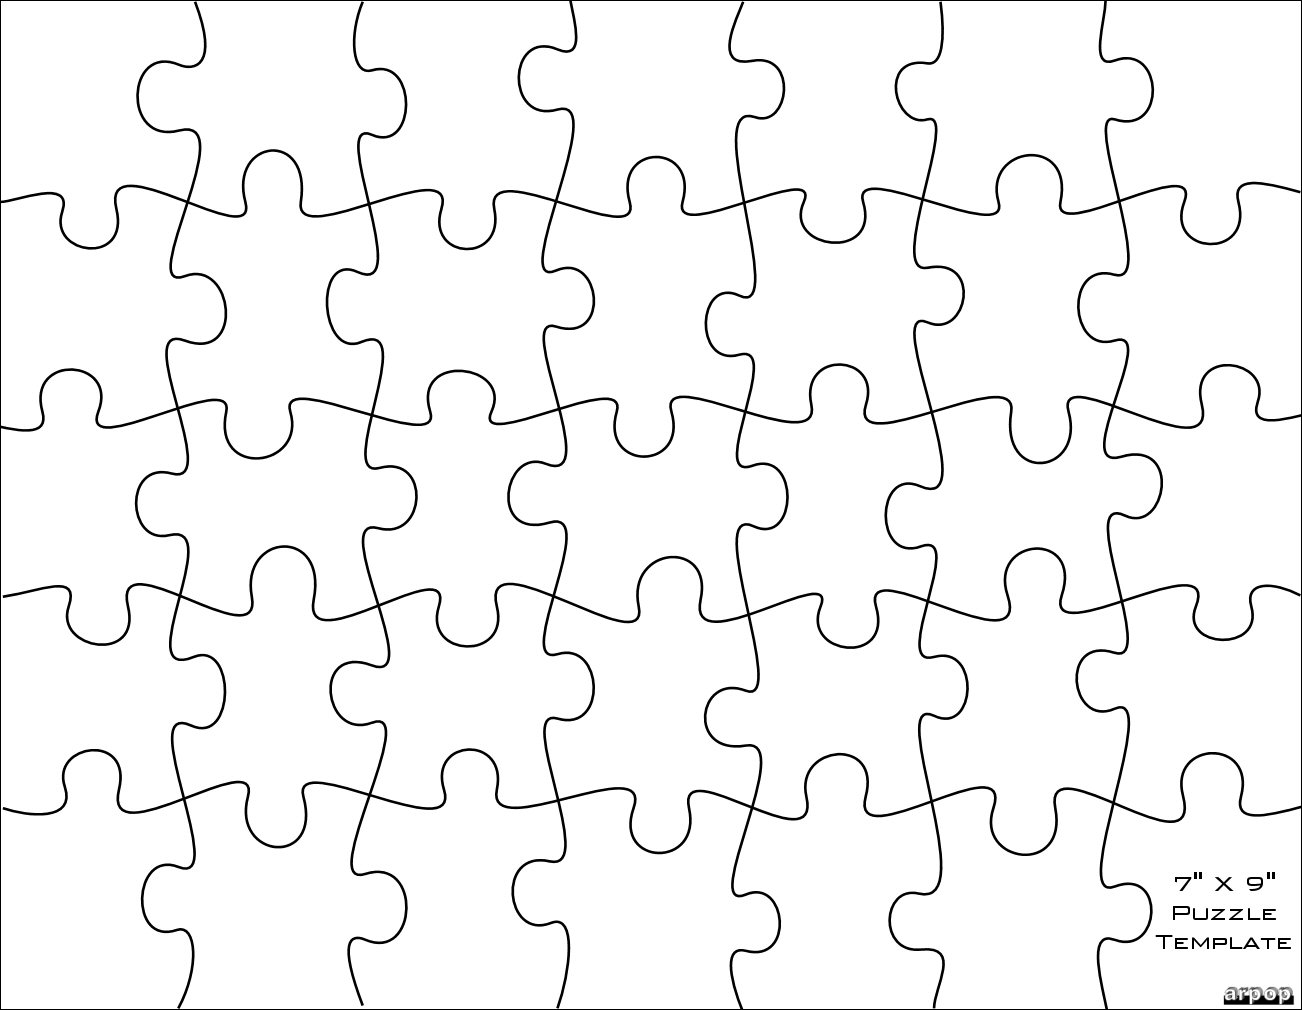 free-puzzle-pieces-template-download-free-puzzle-pieces-template-png